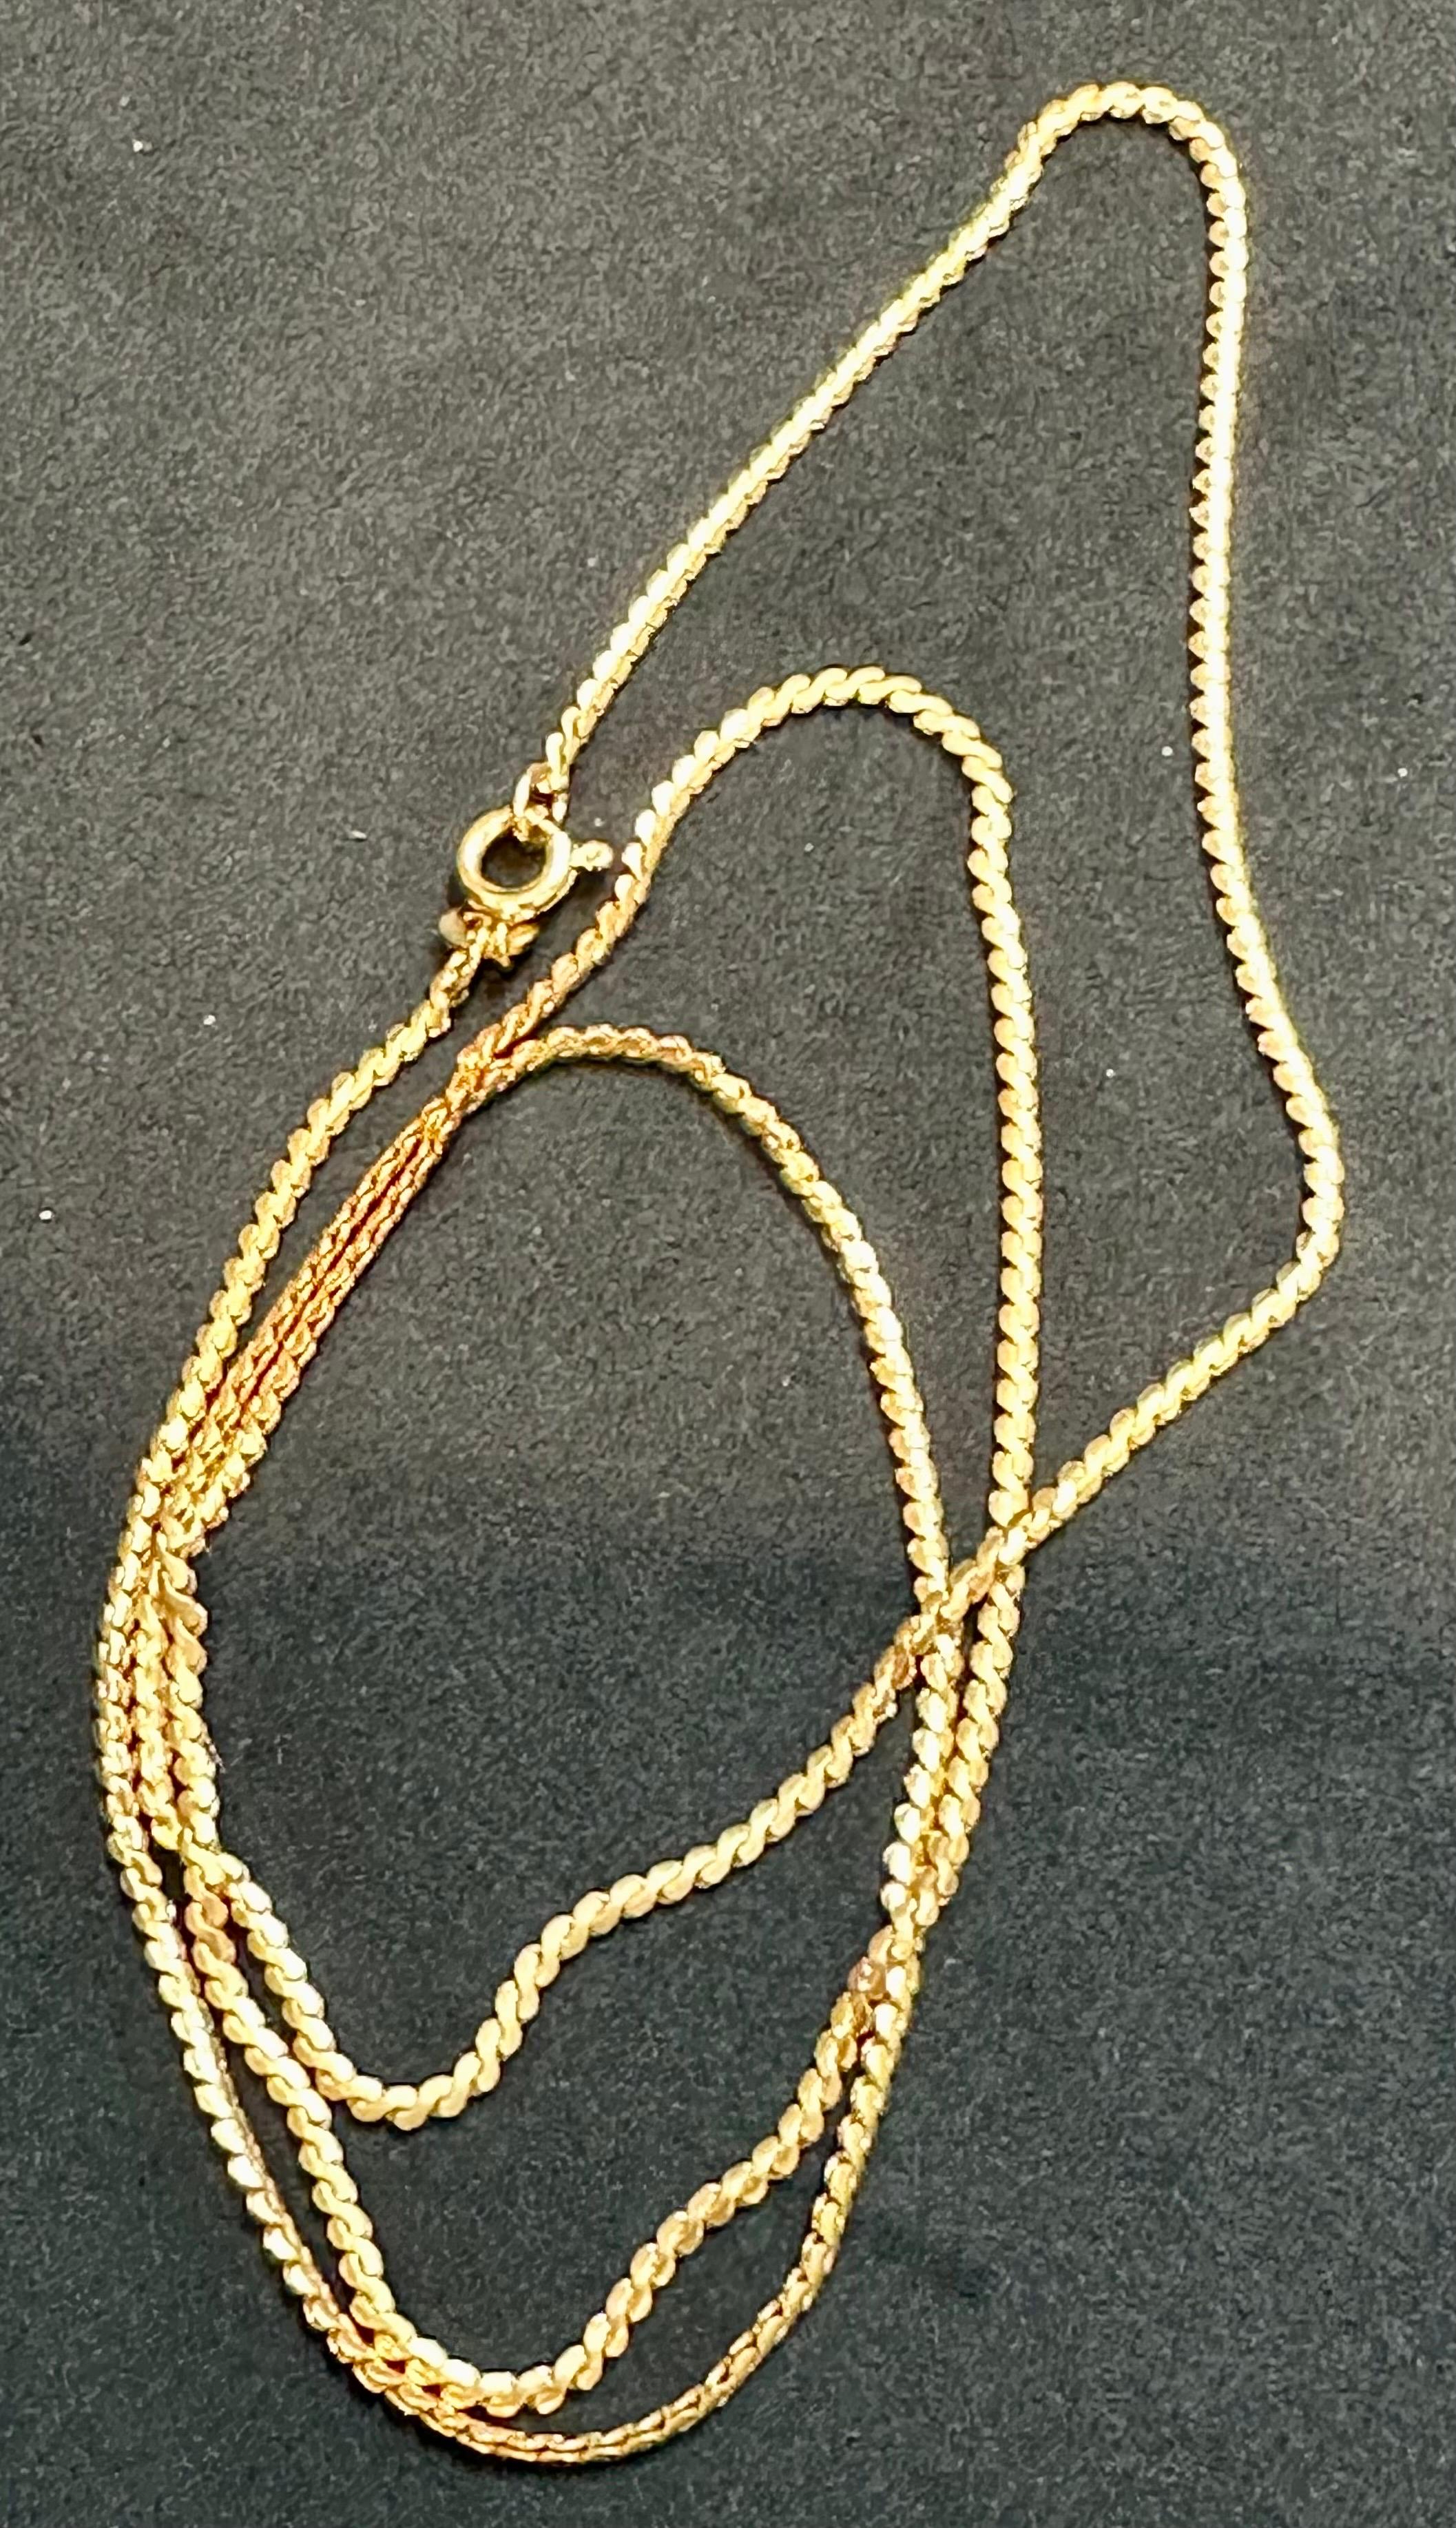 Vintage 18 Karat Yellow Gold 9.6 Gm S Link Chain Necklace For Sale 3